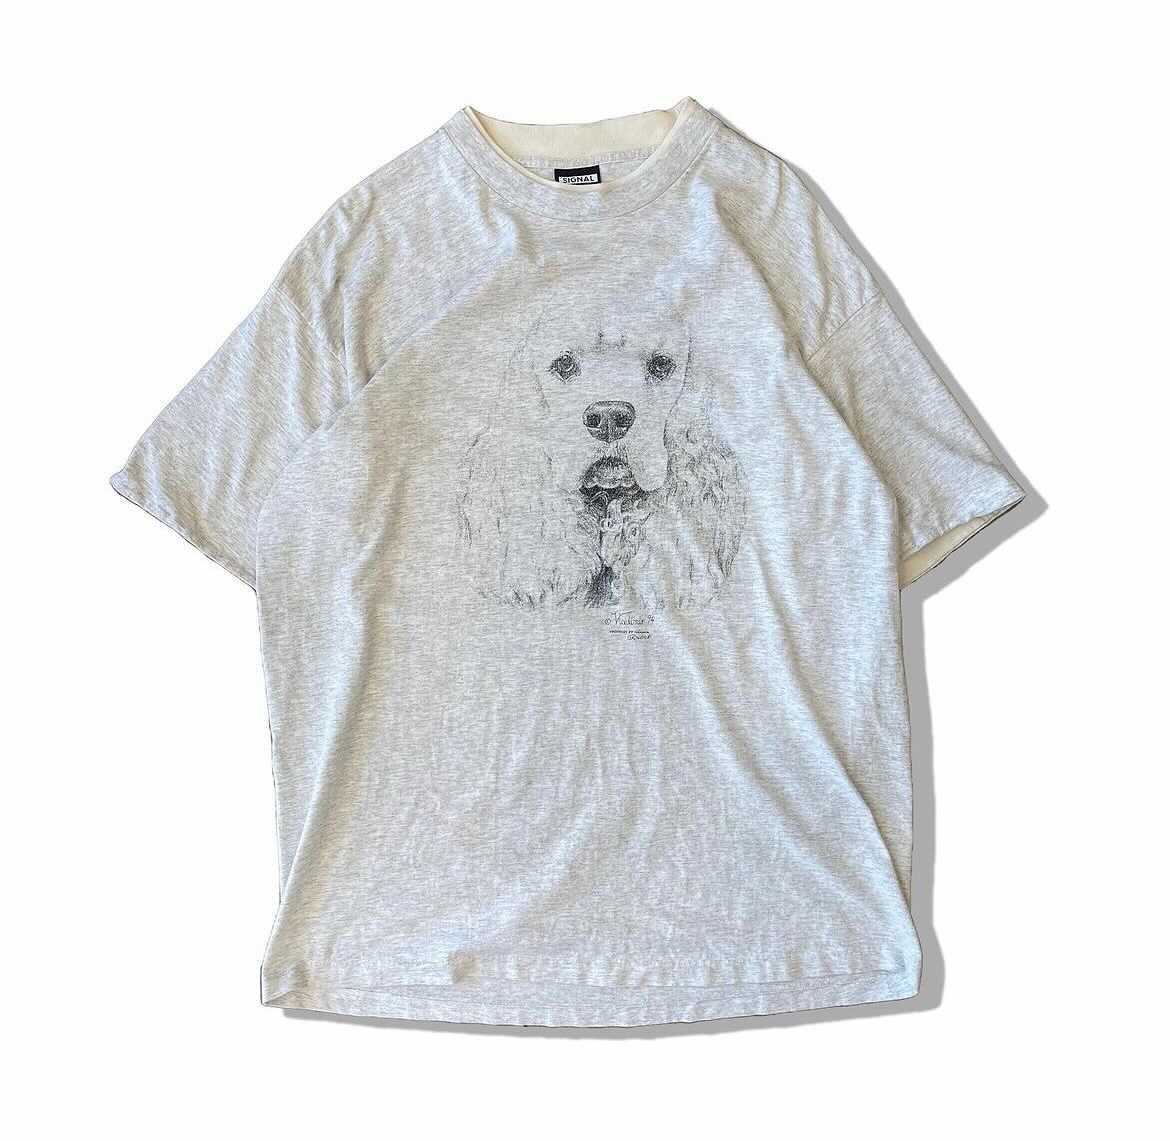 1990's SIGNAL SPORT made in usa Dog Face Print Tee